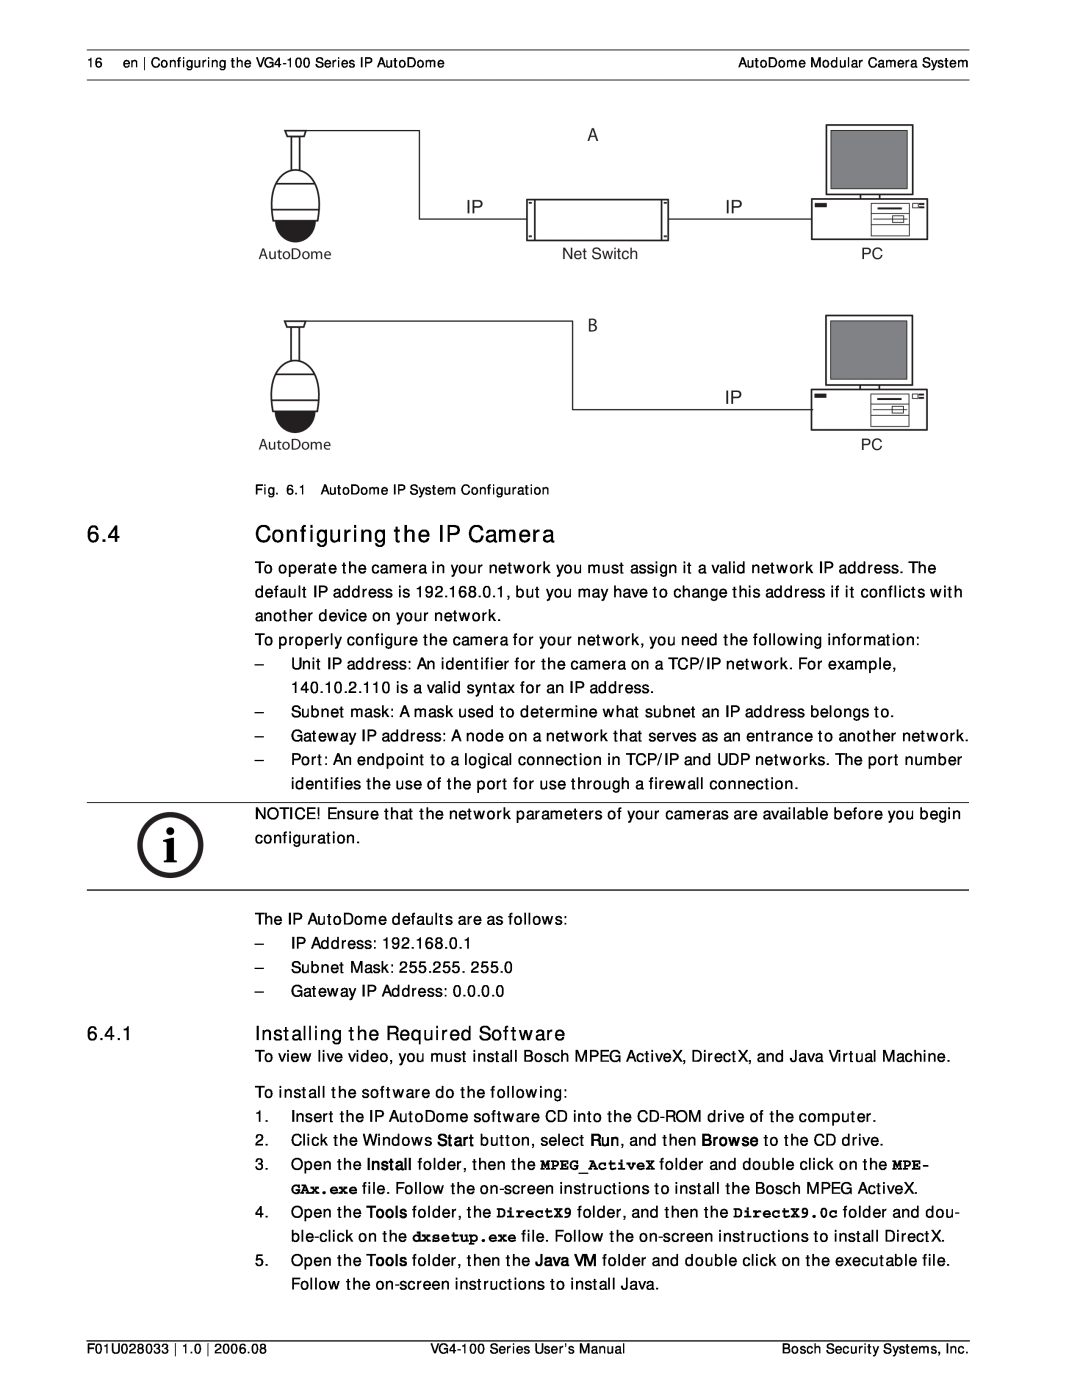 Bosch Appliances VG4-100 user manual Configuring the IP Camera, 6.4.1Installing the Required Software, AutoDome 